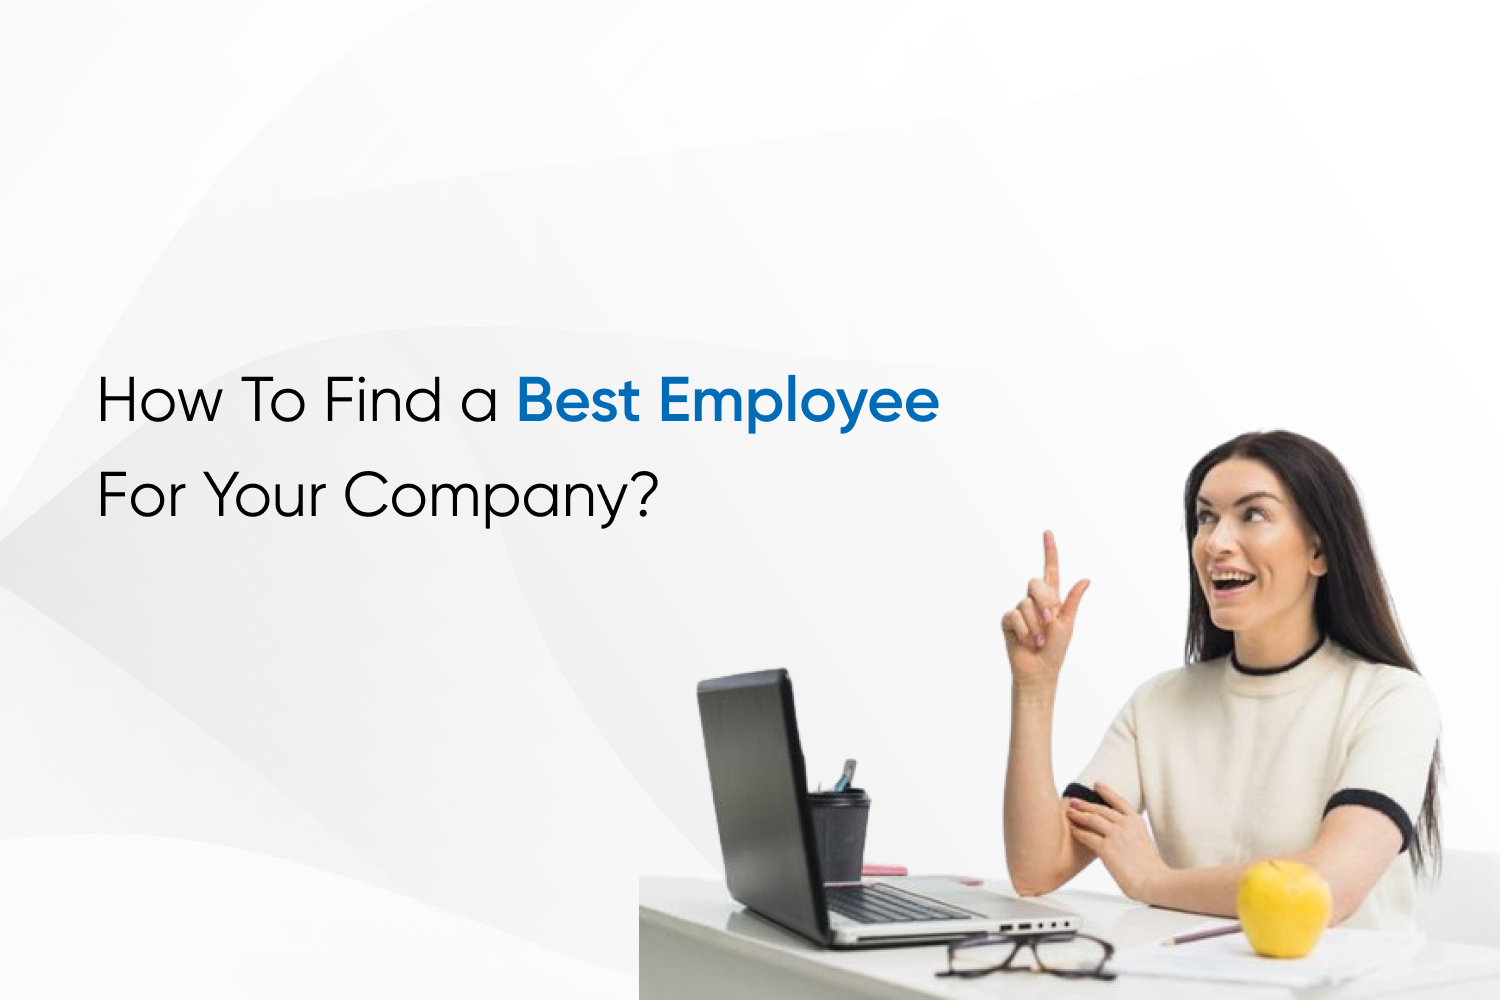 How To Find a Best Employee For Your Company?